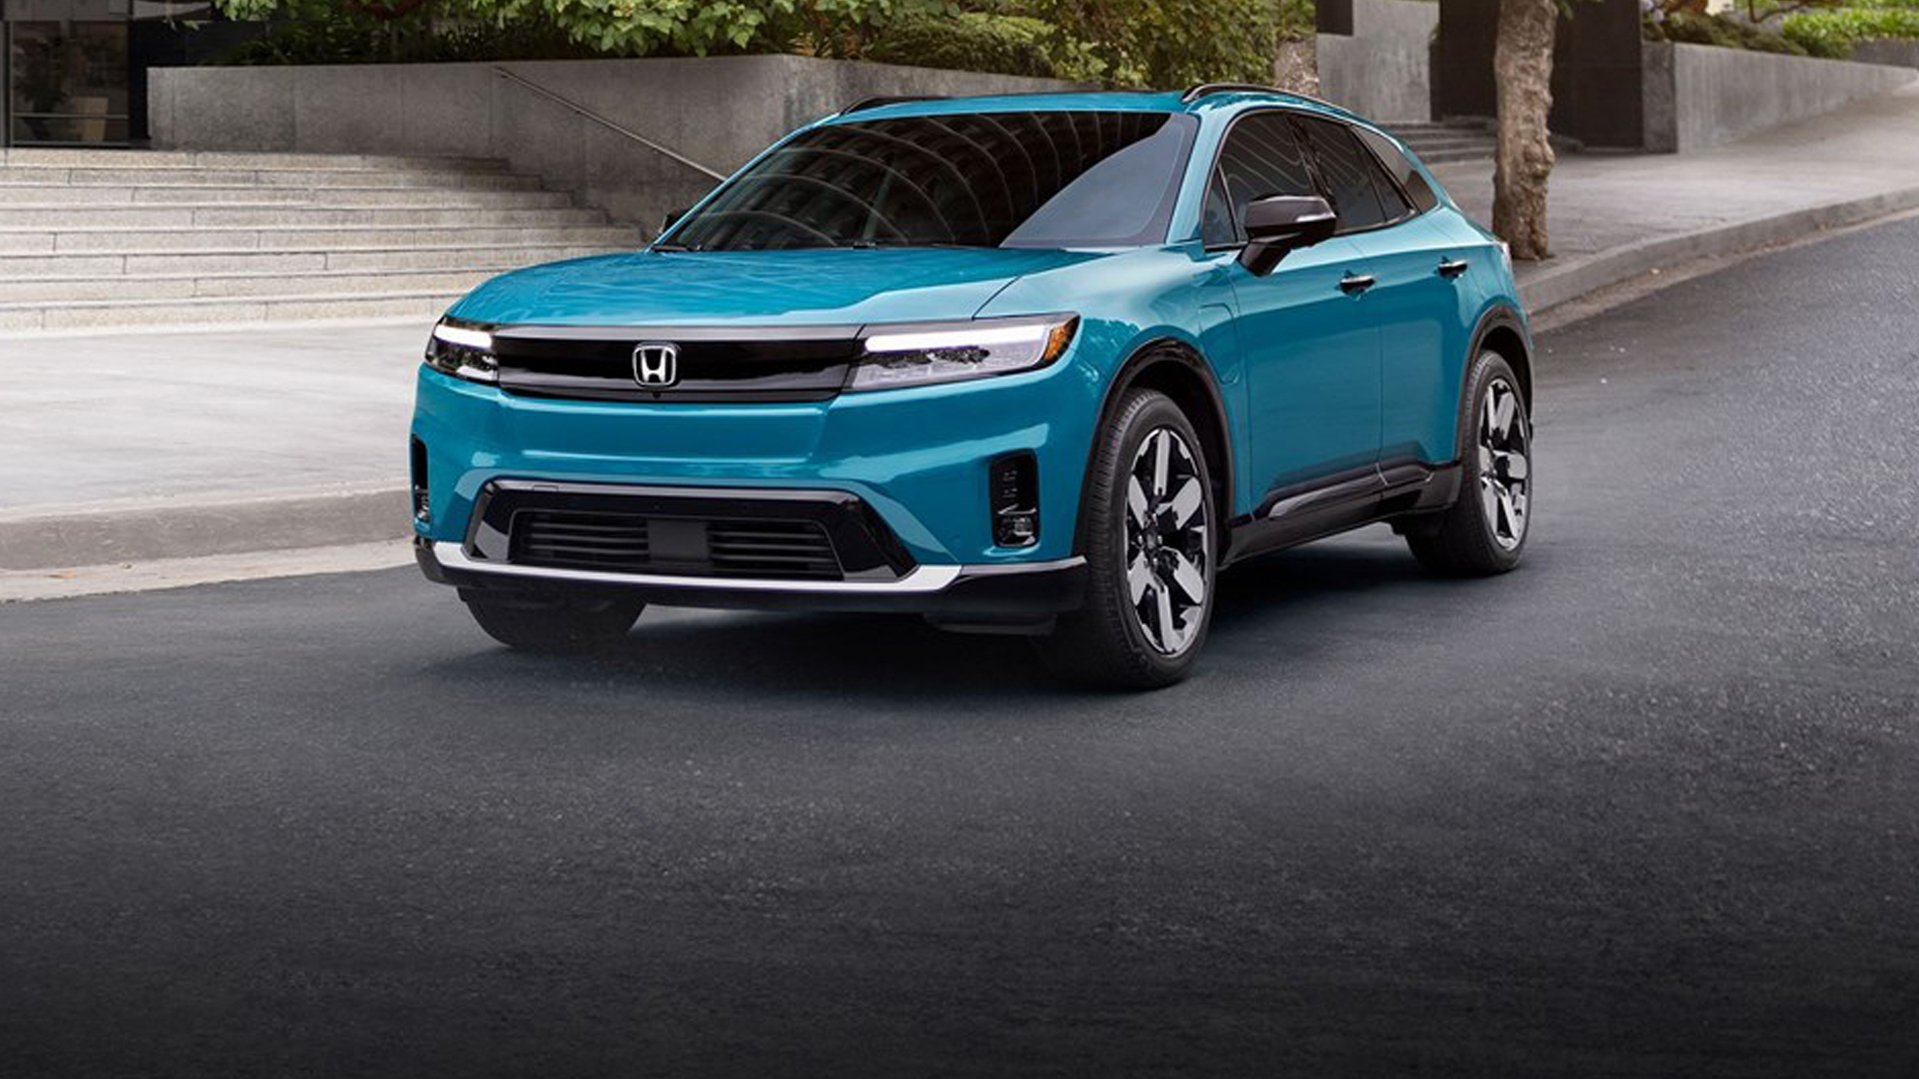 Honda and General Motors have announced they're scrapping a  billion plan to jointly develop affordable electric vehicles.